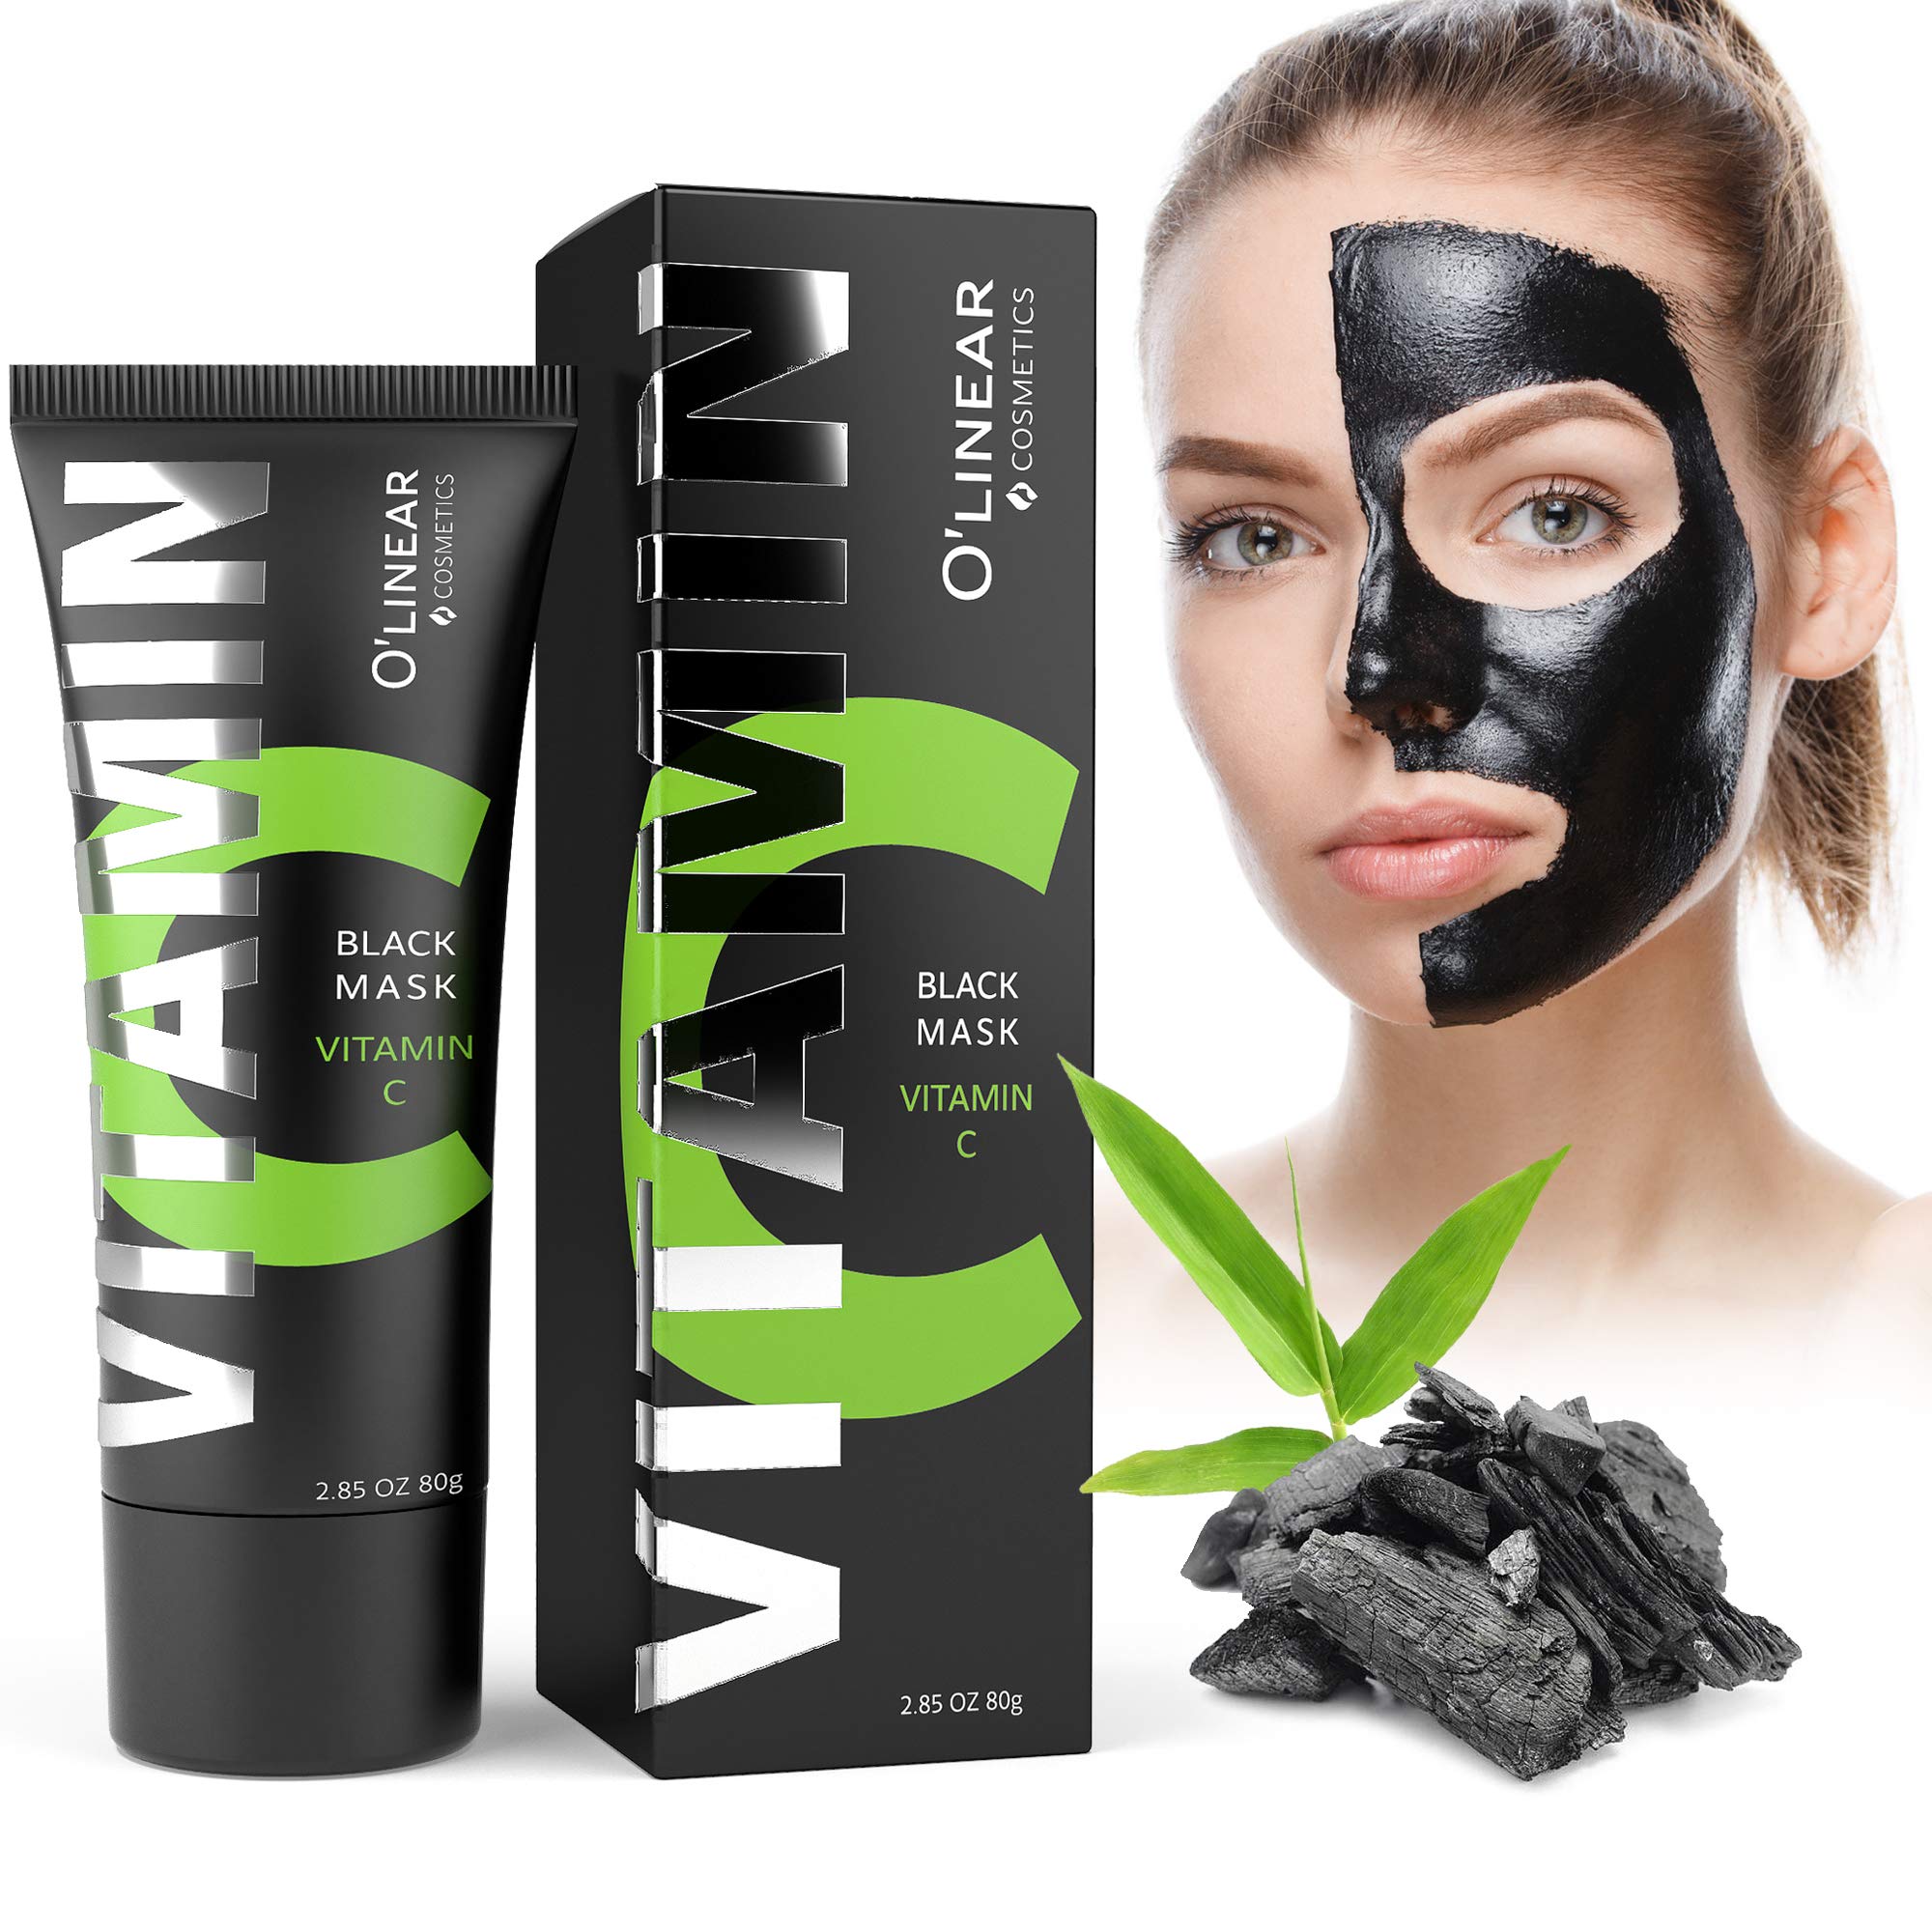 Peel Off Face Mask Charcoal Organic Bamboo with Vitamin C Blackhead Remover Mask, Activated Charcoal Face Mask Skincare Dark Spot Remover for Men and Women, Blackhead Extractor Acne Mask 2.7 oz 80 g